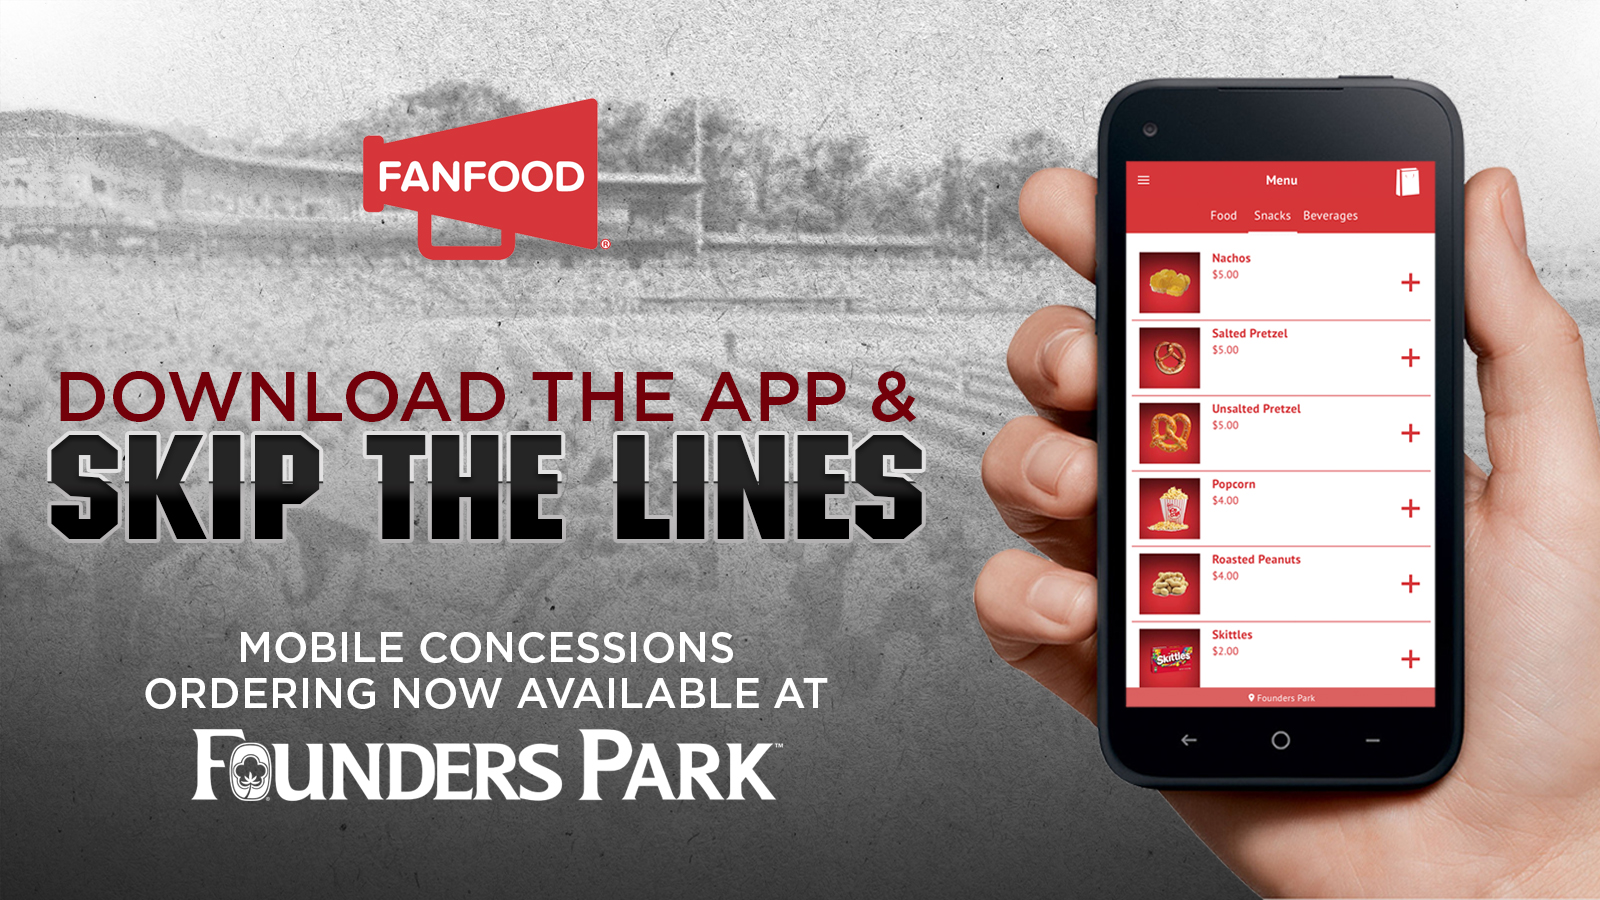 FanFood Partners with Gamecocks to Provide Mobile Concessions Ordering Platform